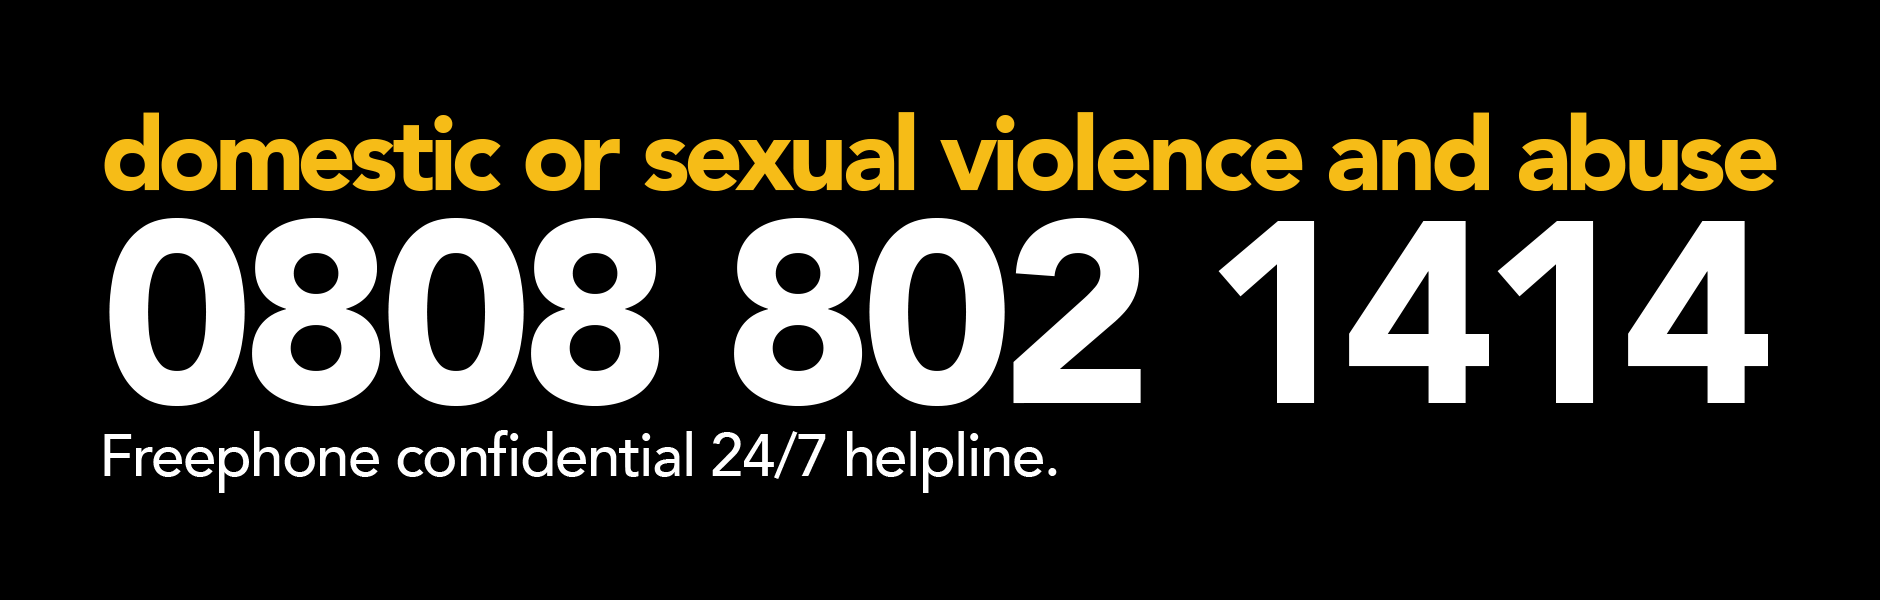 Domestic or Sexual Violence and Abuse Helpline number - 0808 802 1414